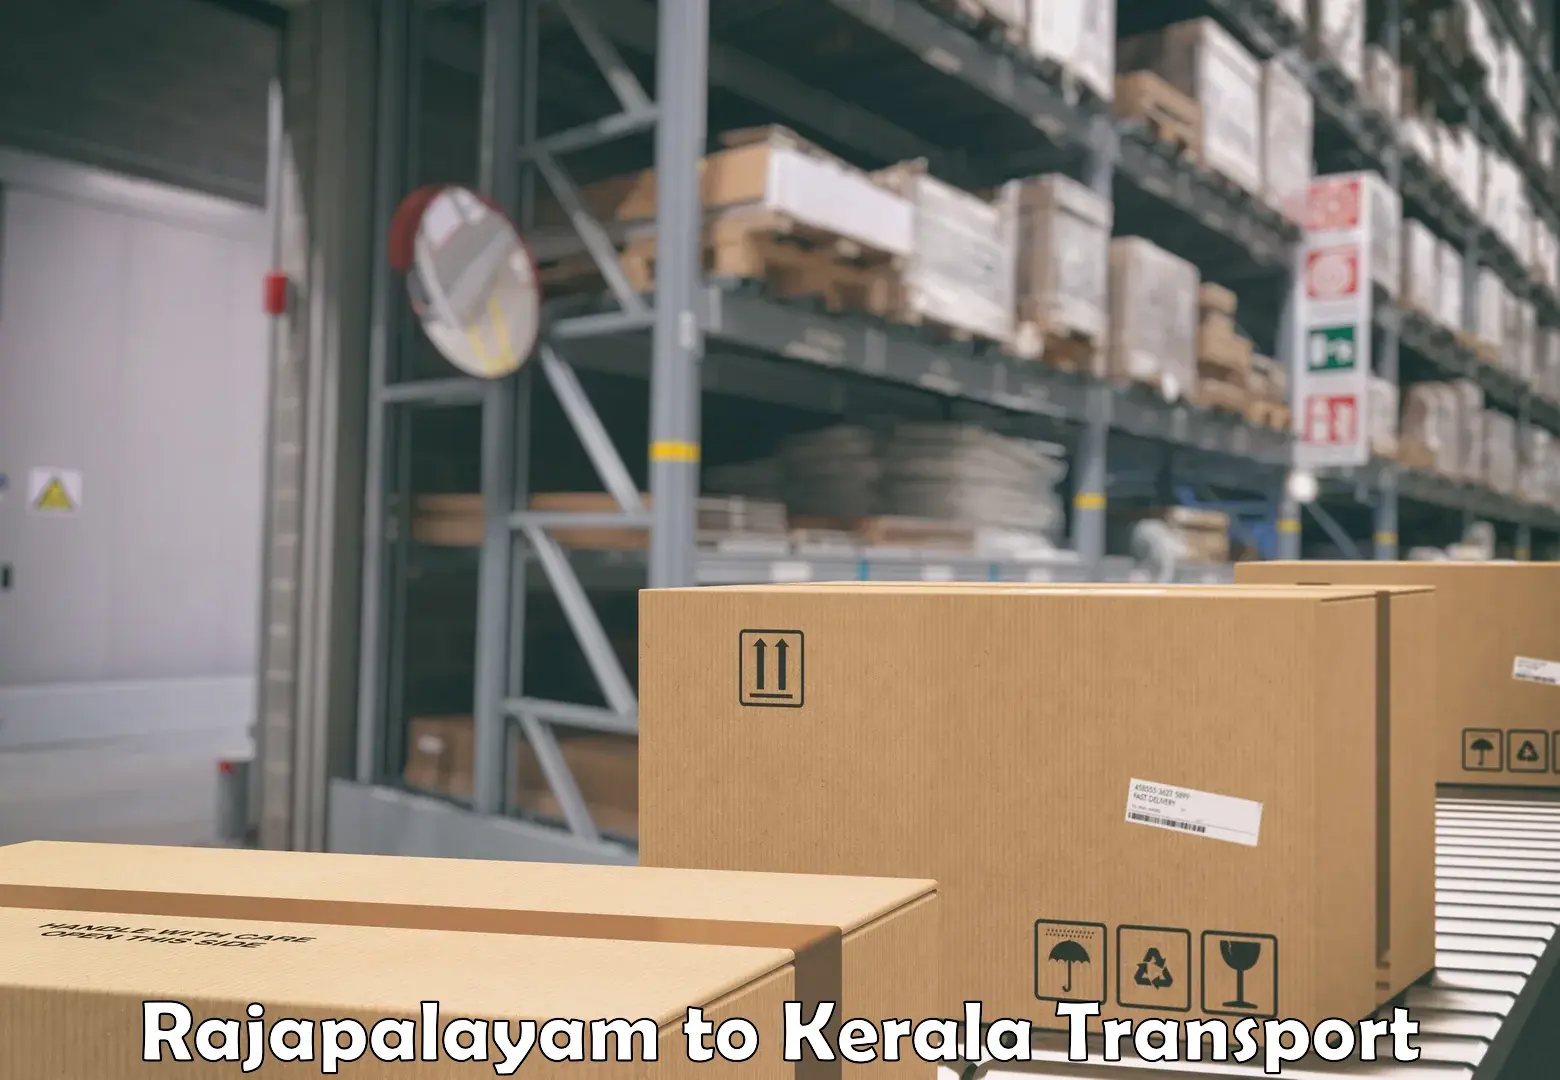 Goods delivery service Rajapalayam to Trivandrum